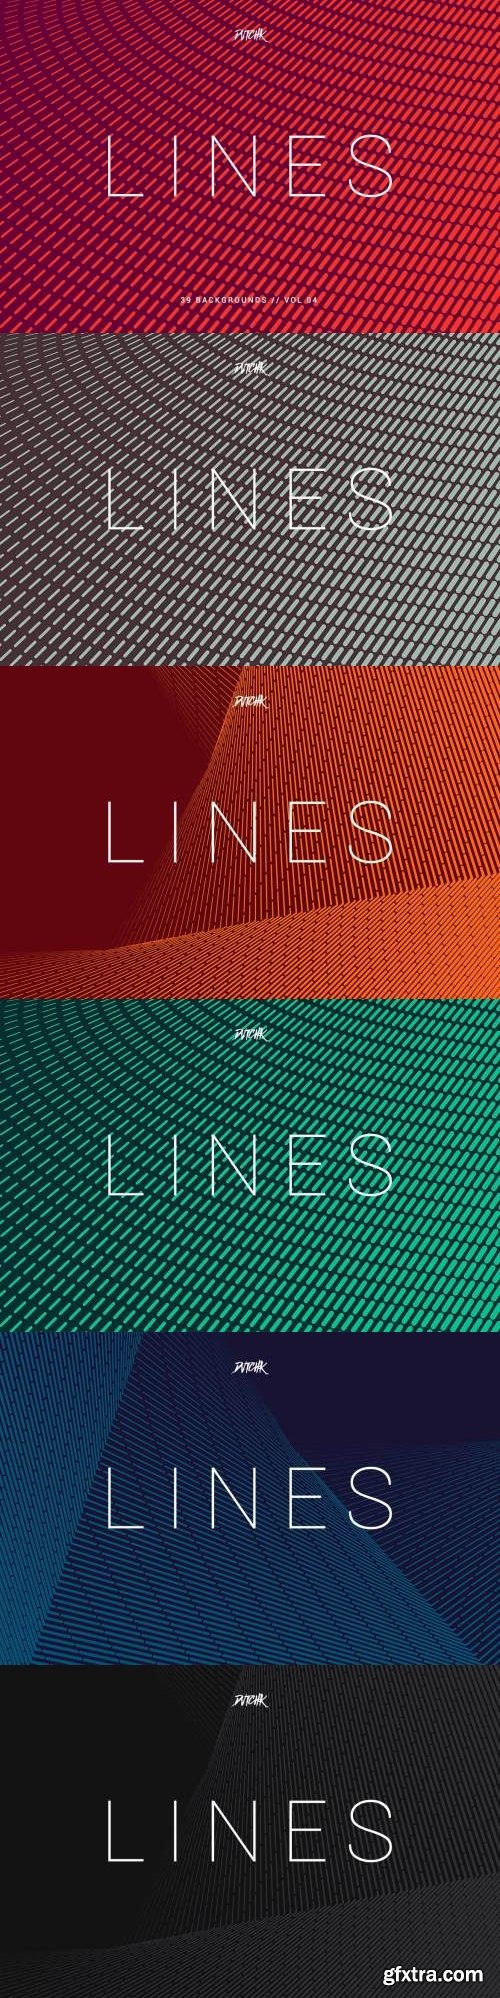 Lines | Abstract Stripes Backgrounds | Vol. 04